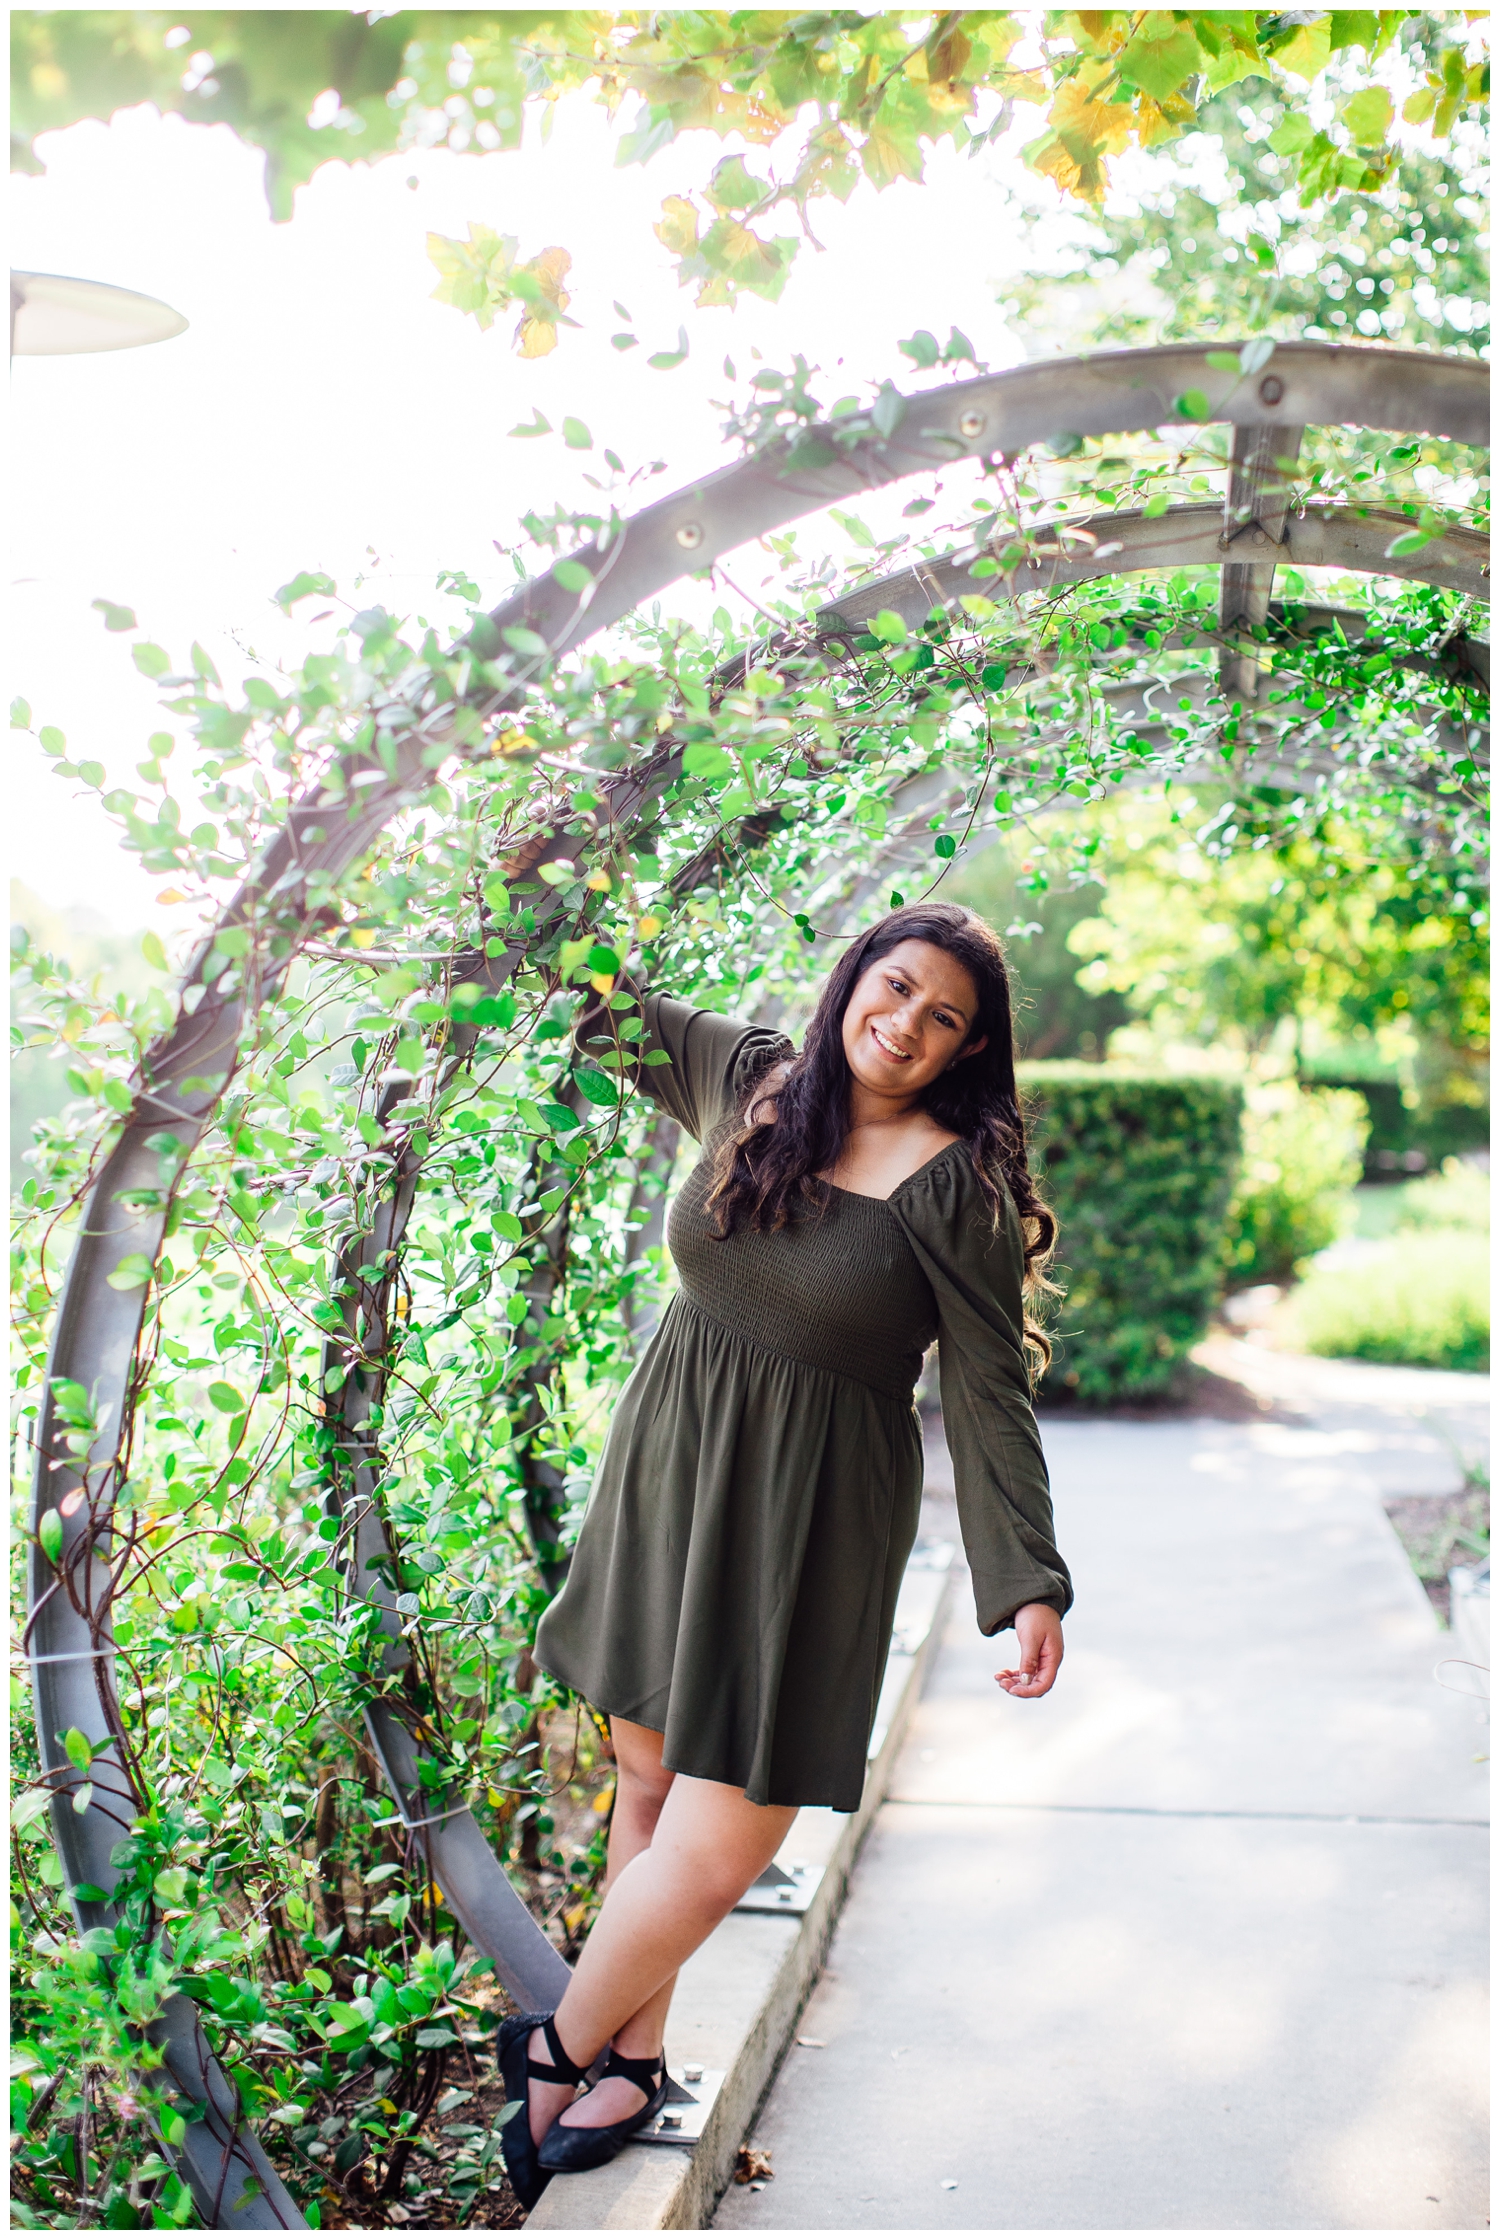 Houston senior girl in dark green dress hanging on archway with vines outdoors